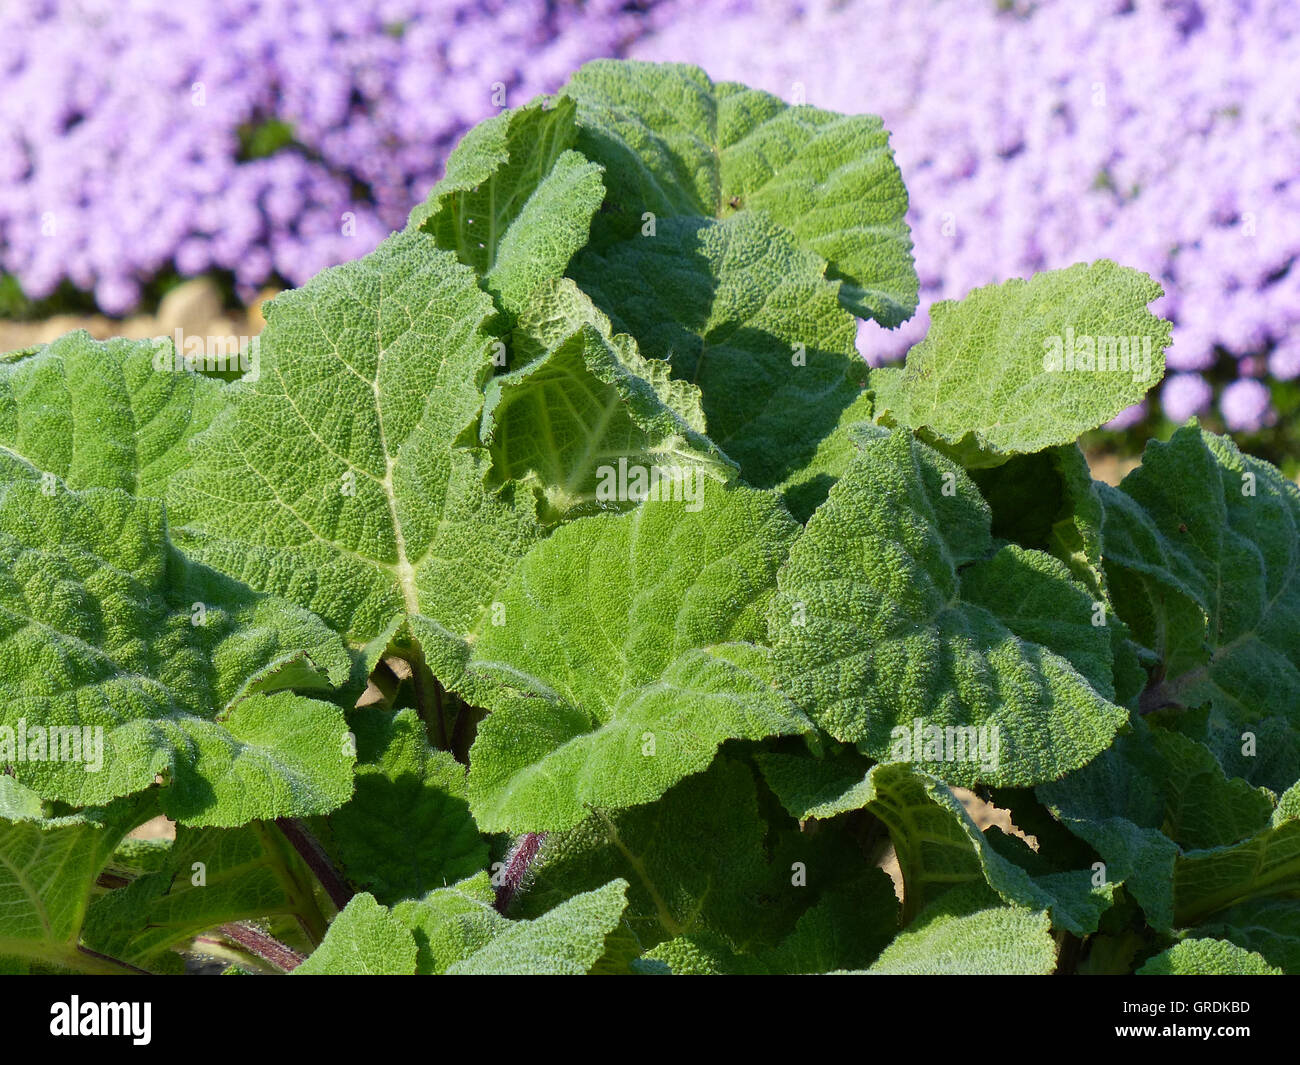 Large Green Clary Sage Leaves, Salvia Sclarea, And Violet Blossoms Of Thyme Stock Photo